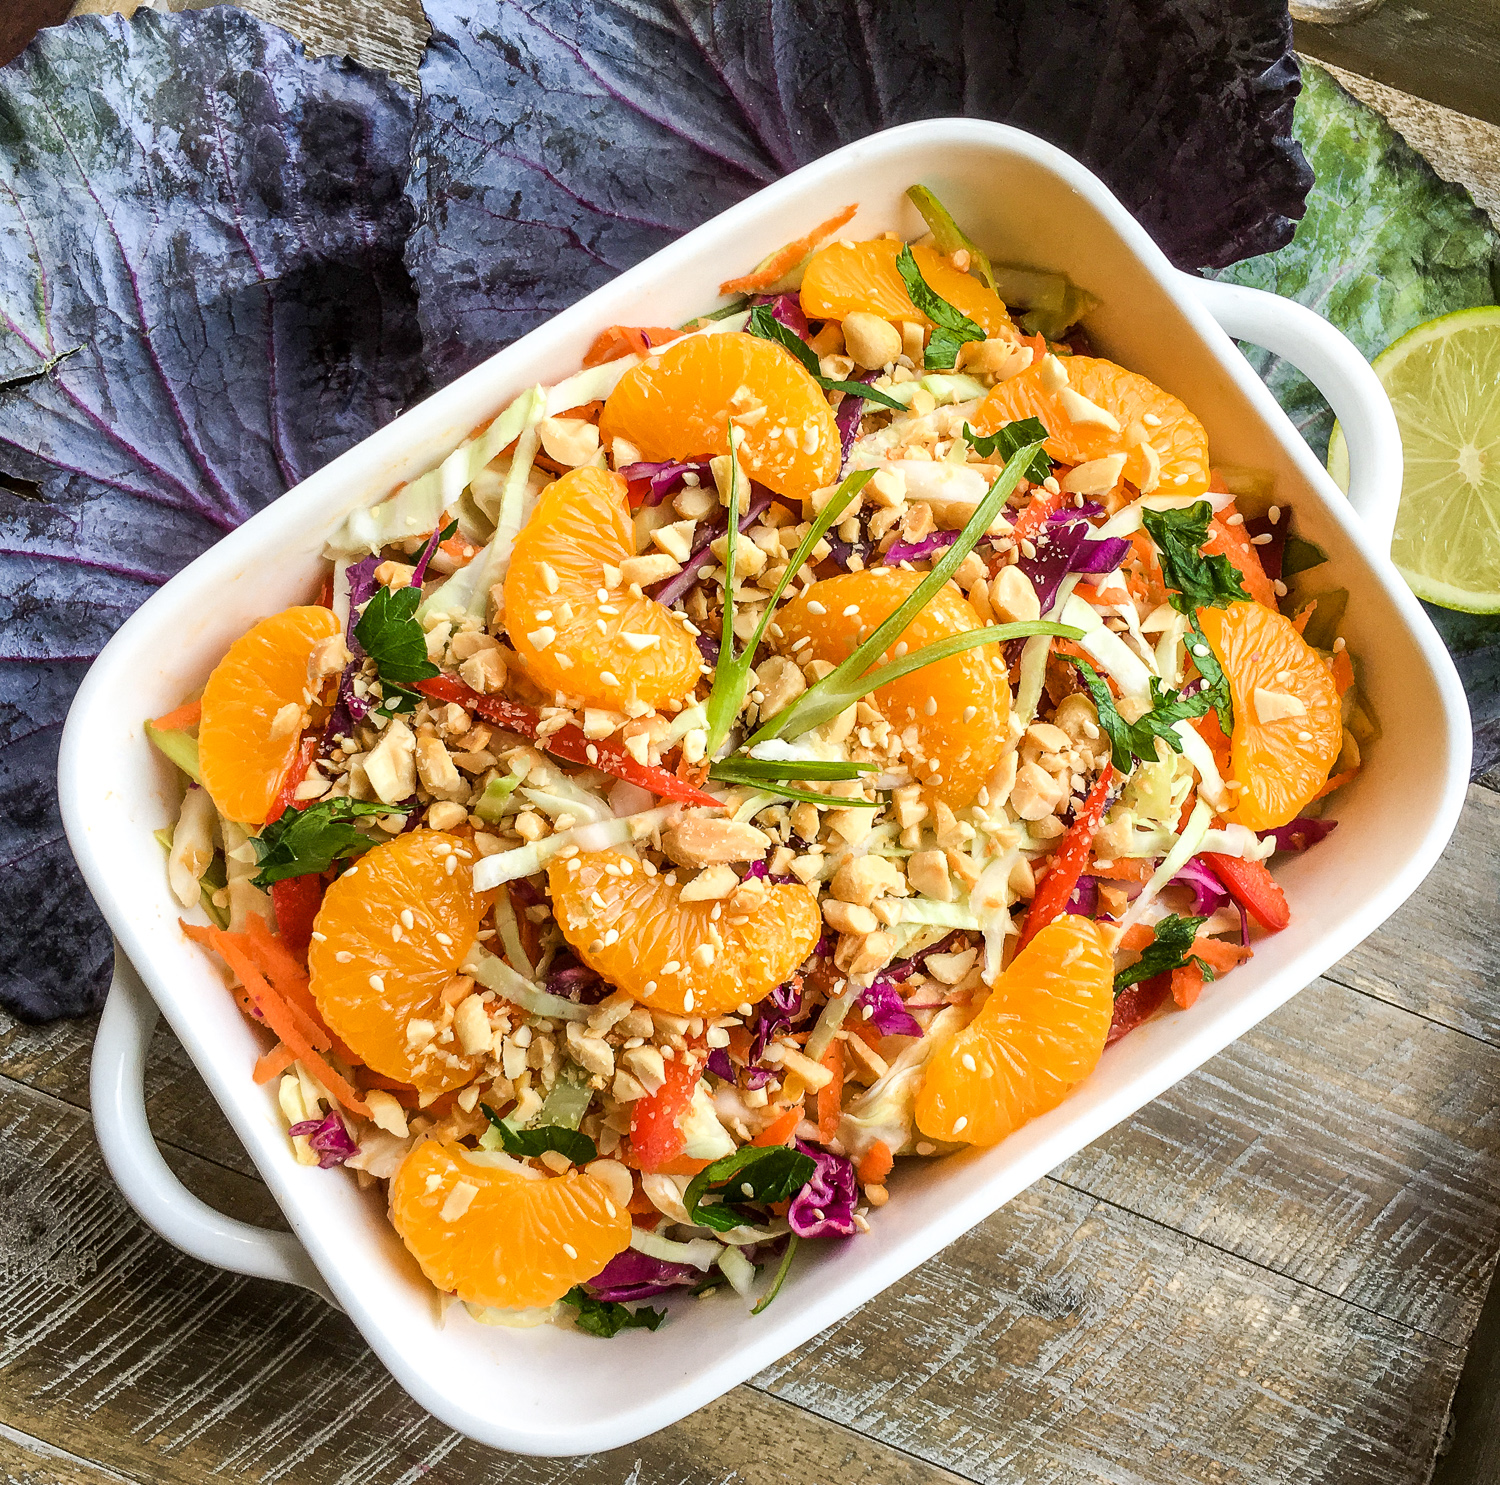 Asian Cabbage Salad with Warm Spicy Peanut Dressing